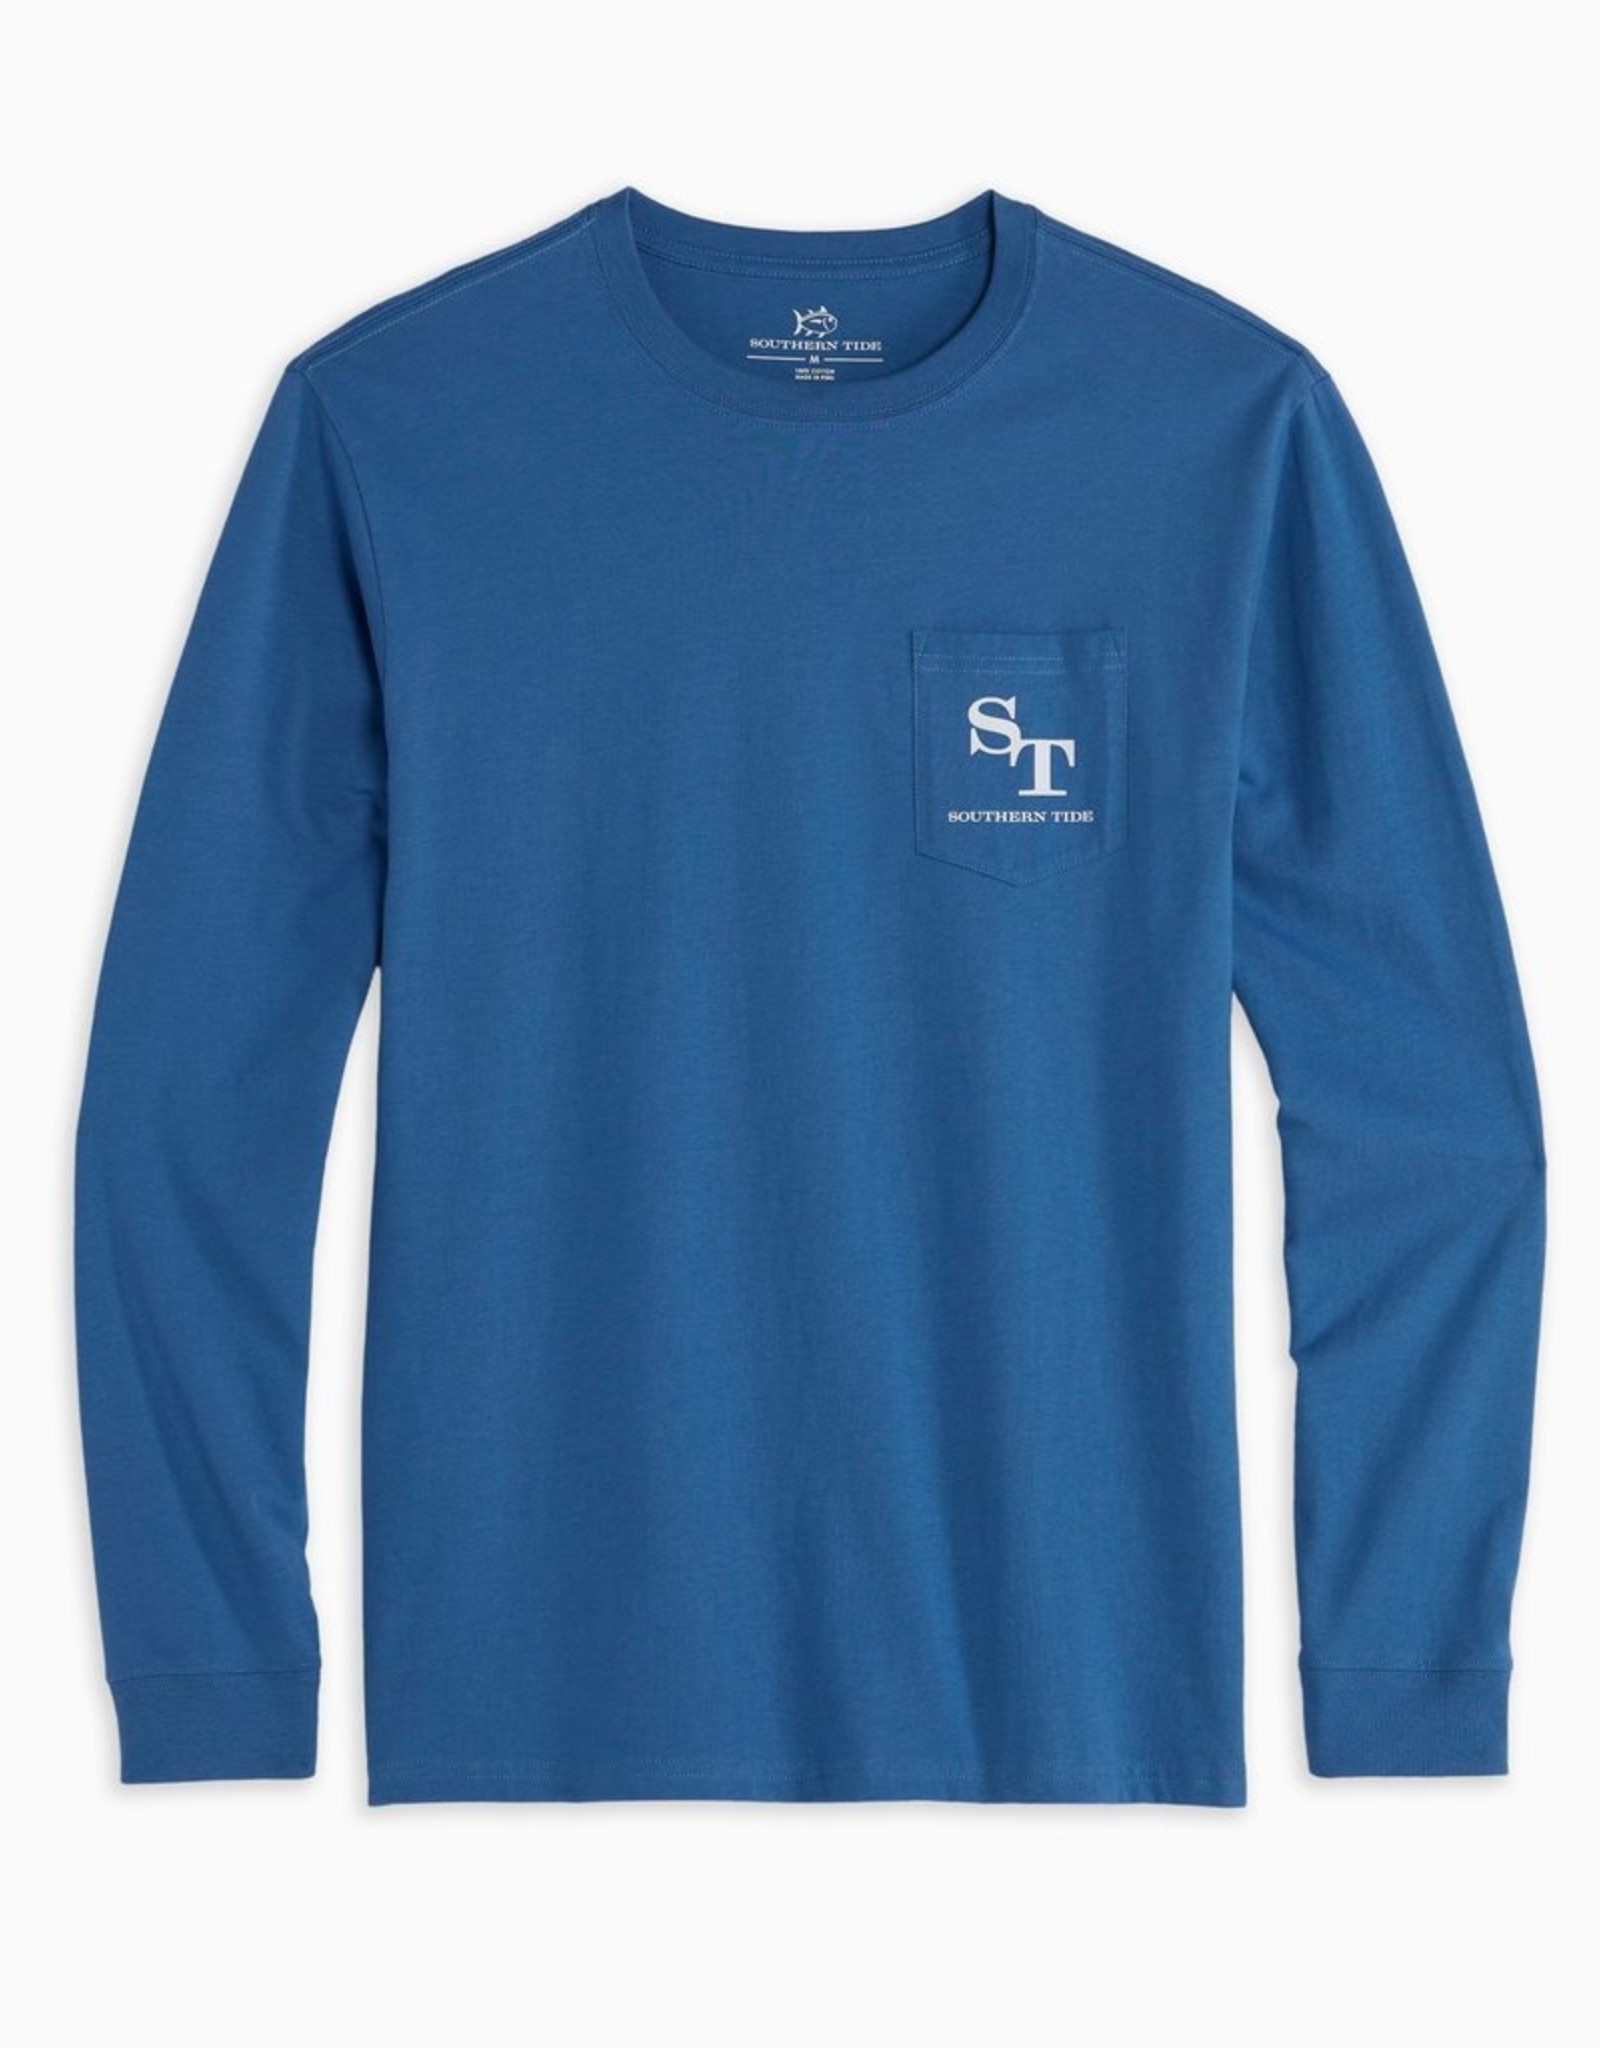 Southern Tide Superfly Tee